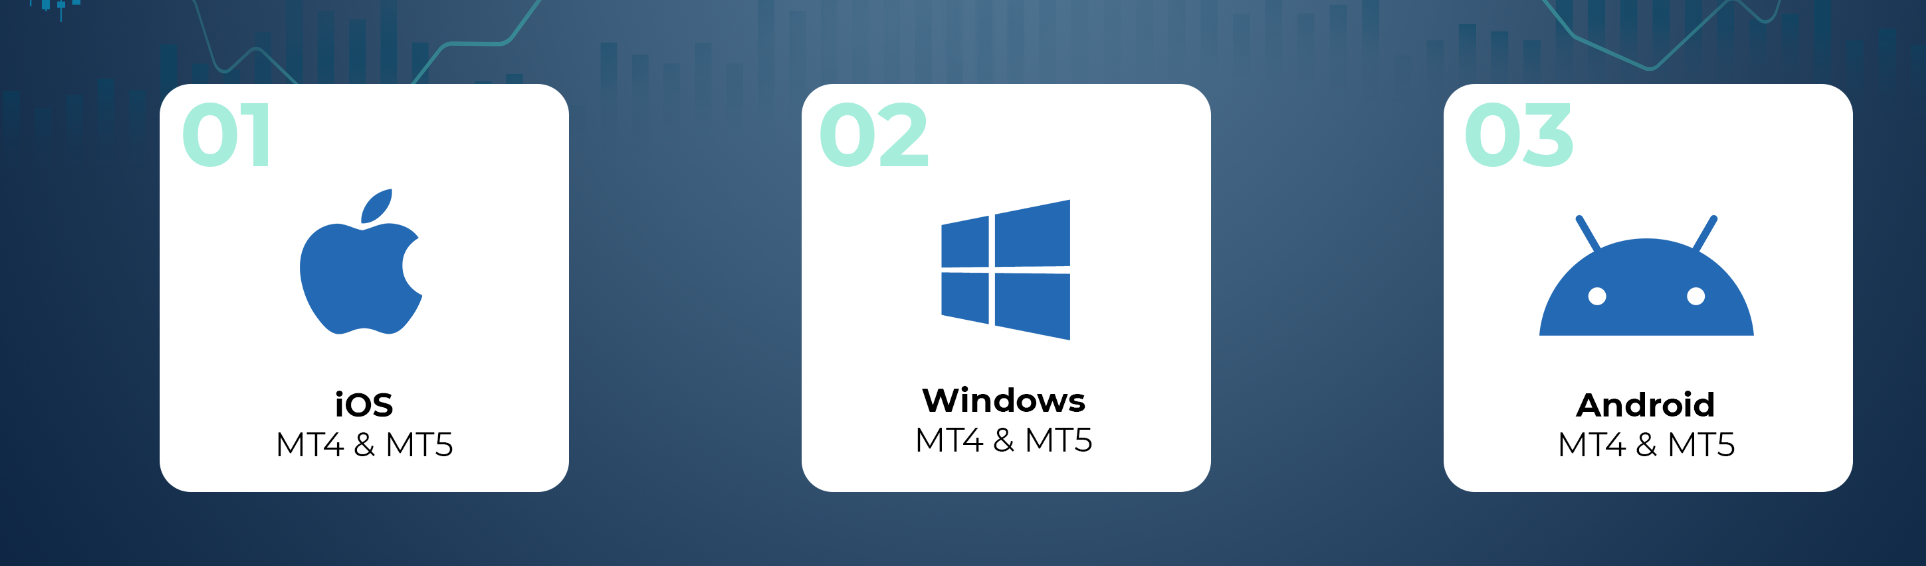 MT4 and MT5 are available on IOS, Windows and Android